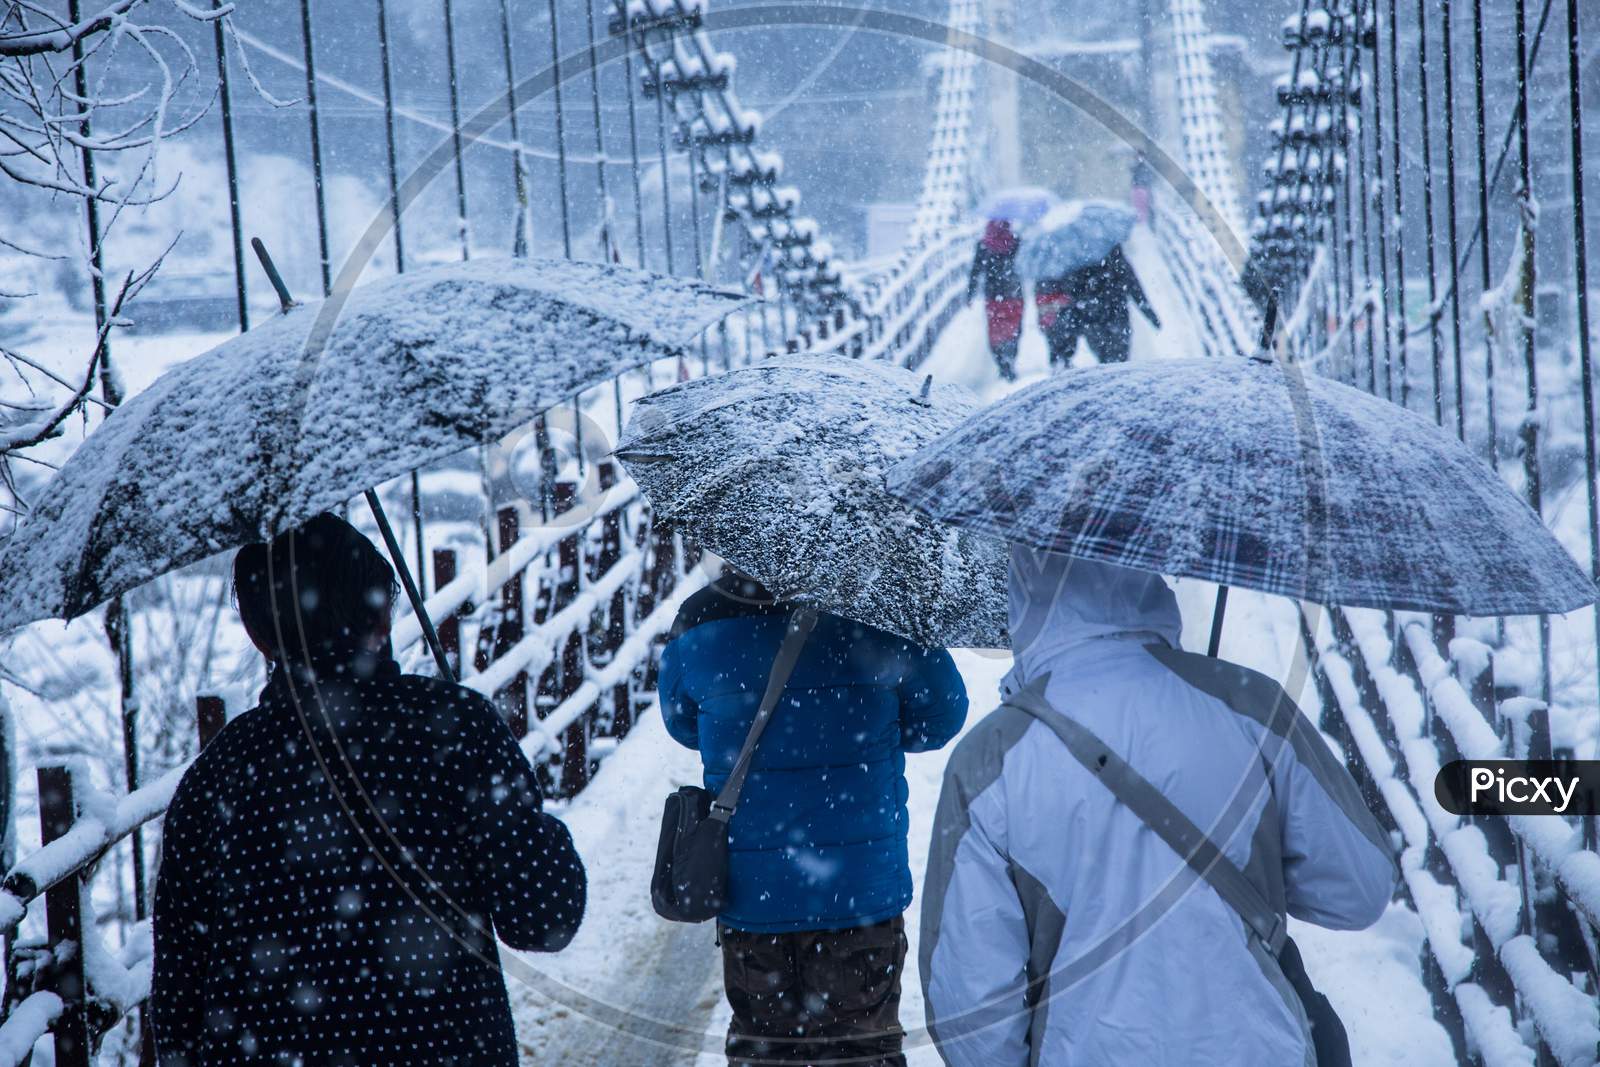 Heavy Winter Snow Fall, People Walking With Umbrellas On The Bridge,Bad Weather - Image